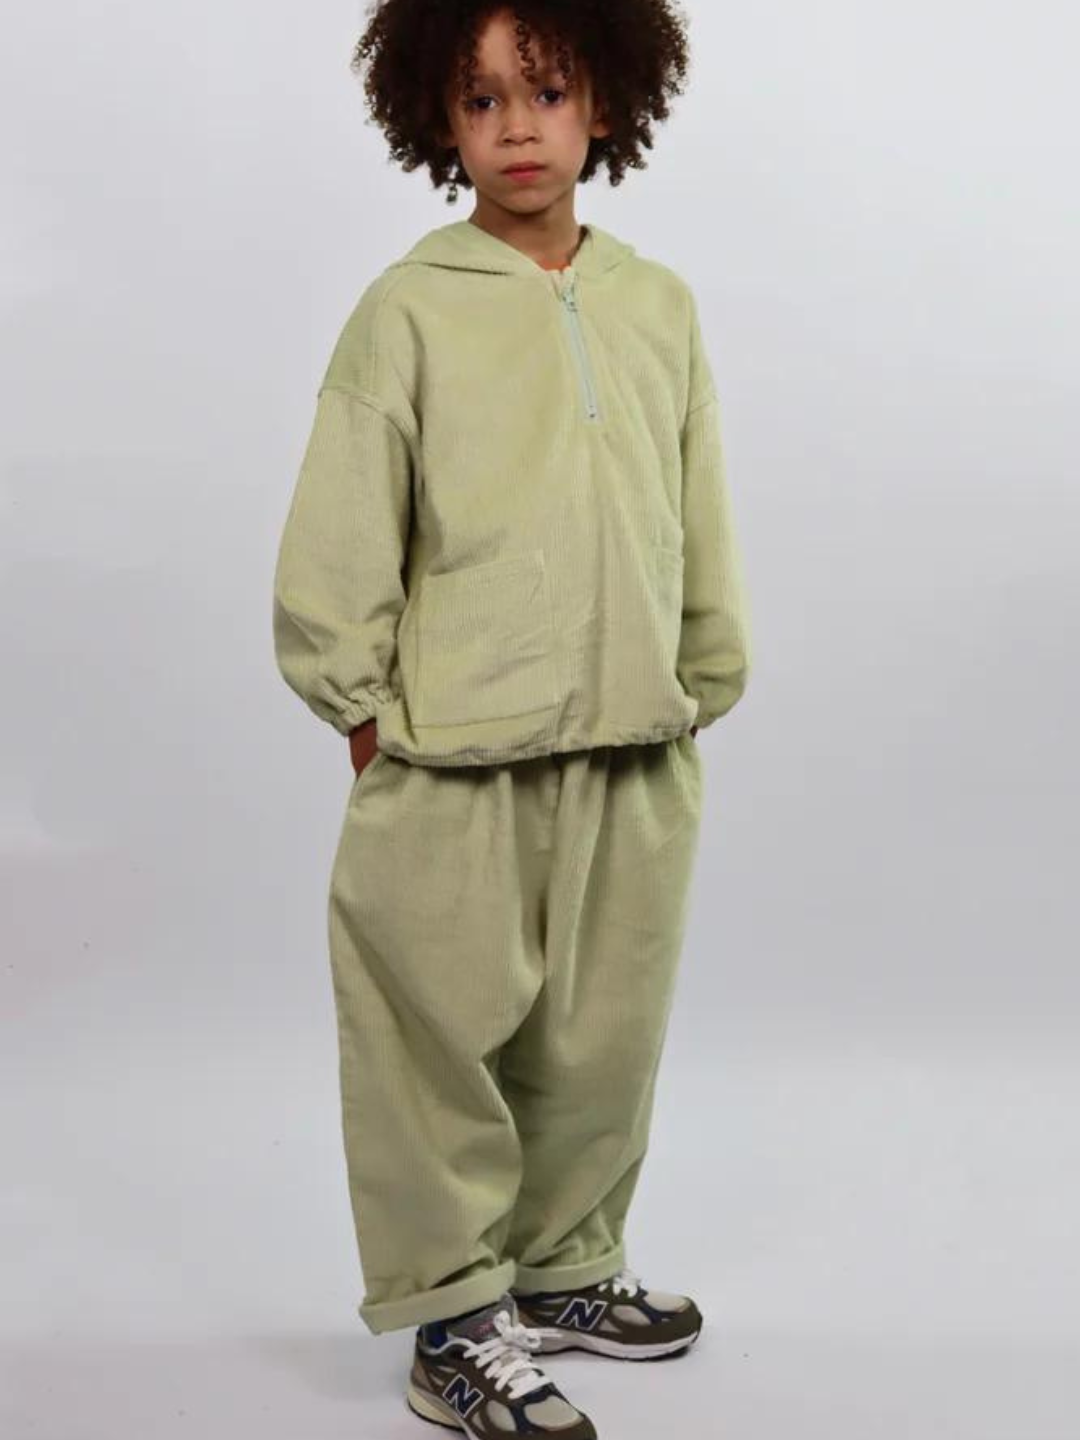 A child wearing a matching kids' hooded smock top and pants in light pistachio green